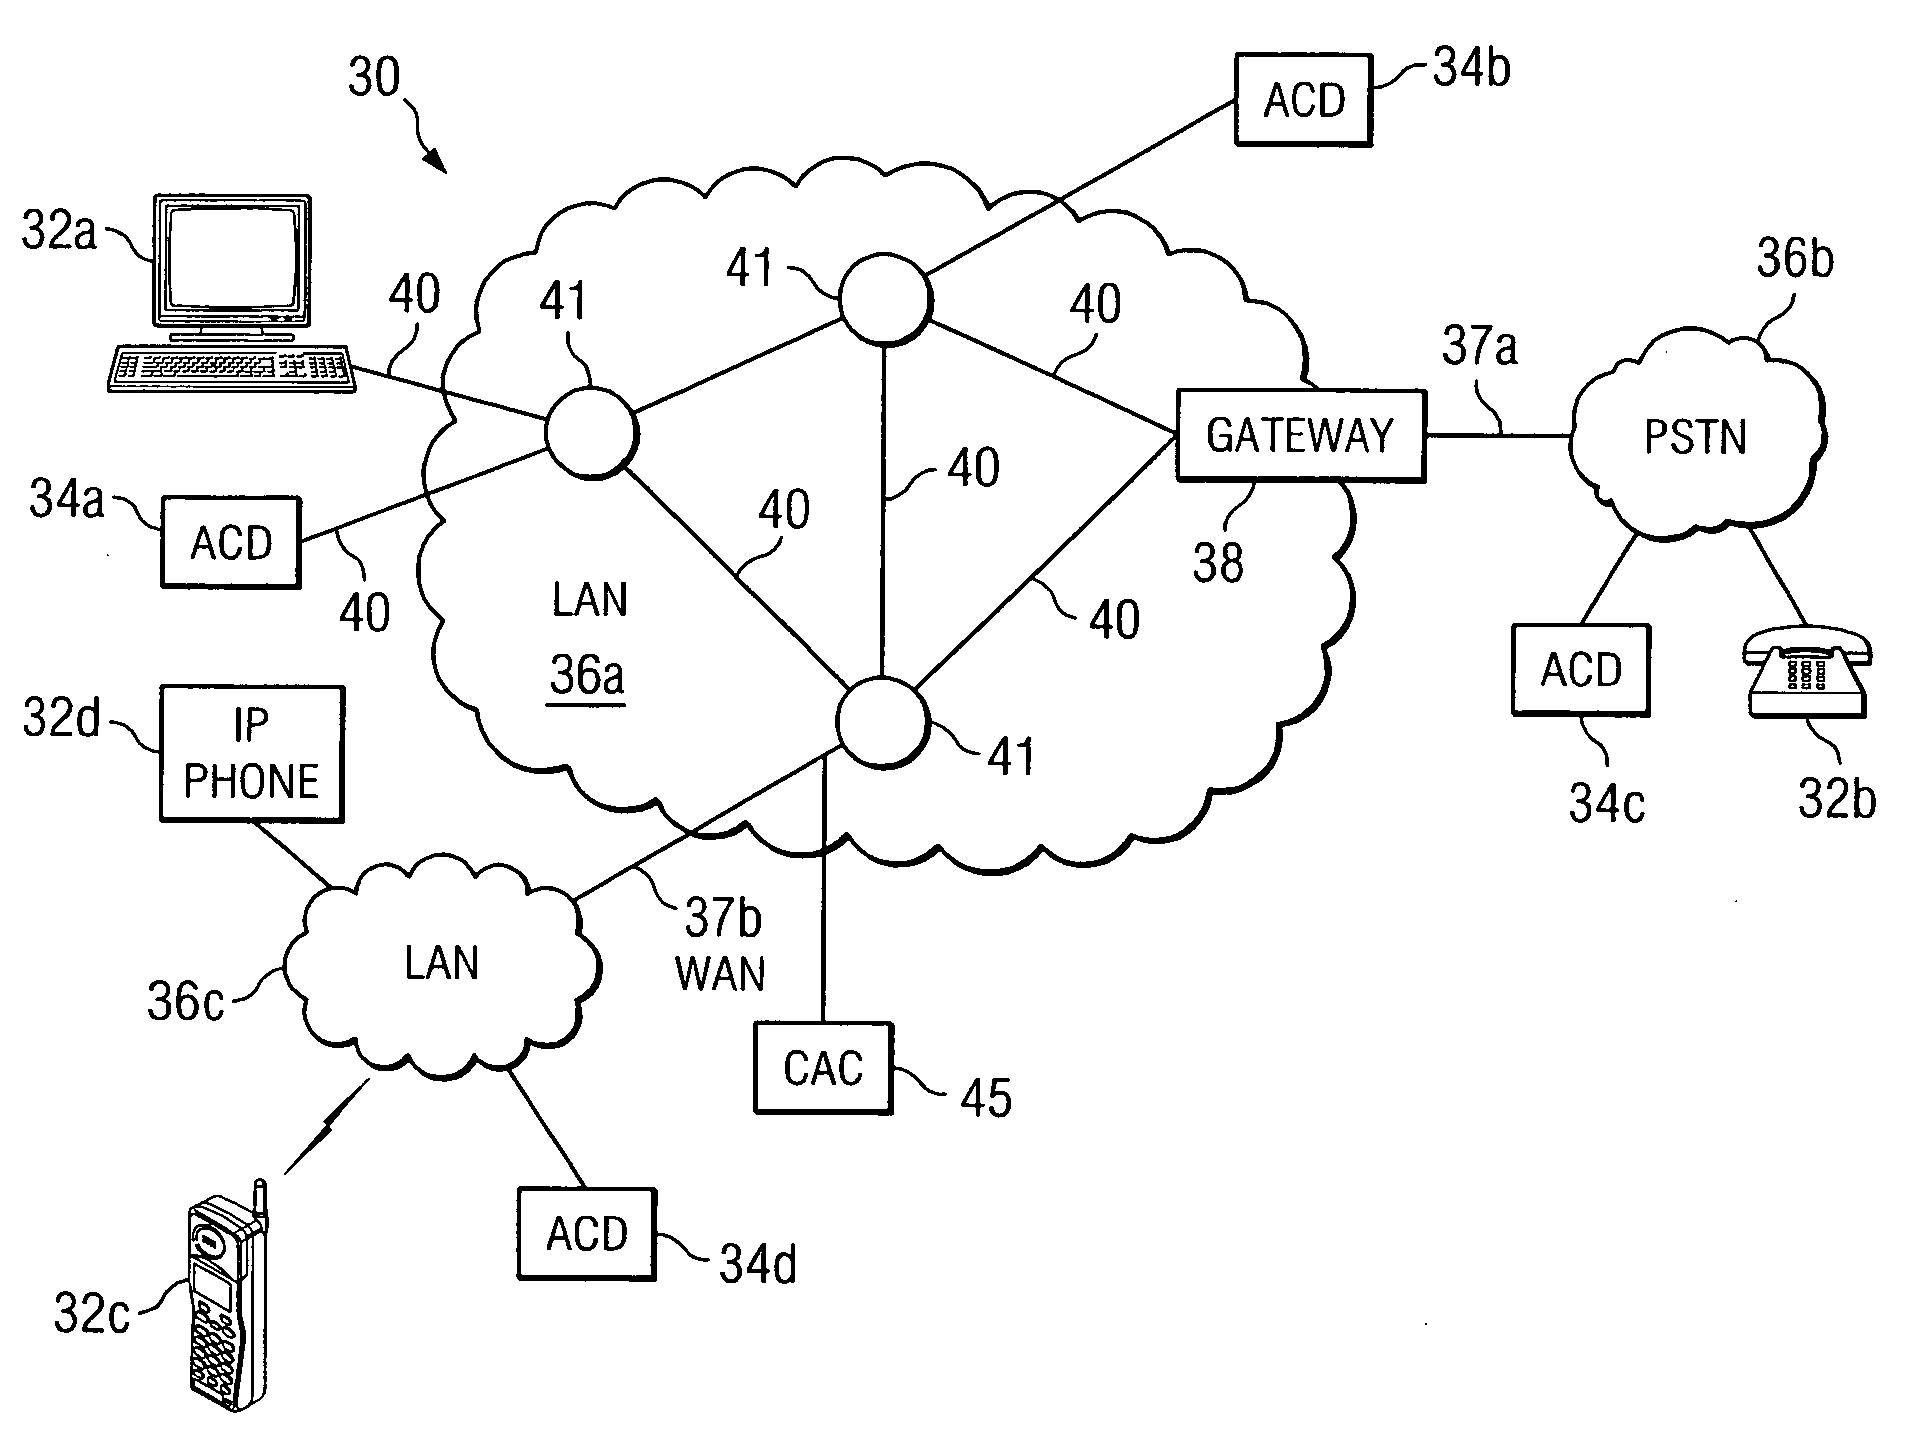 Method and system for distributing calls